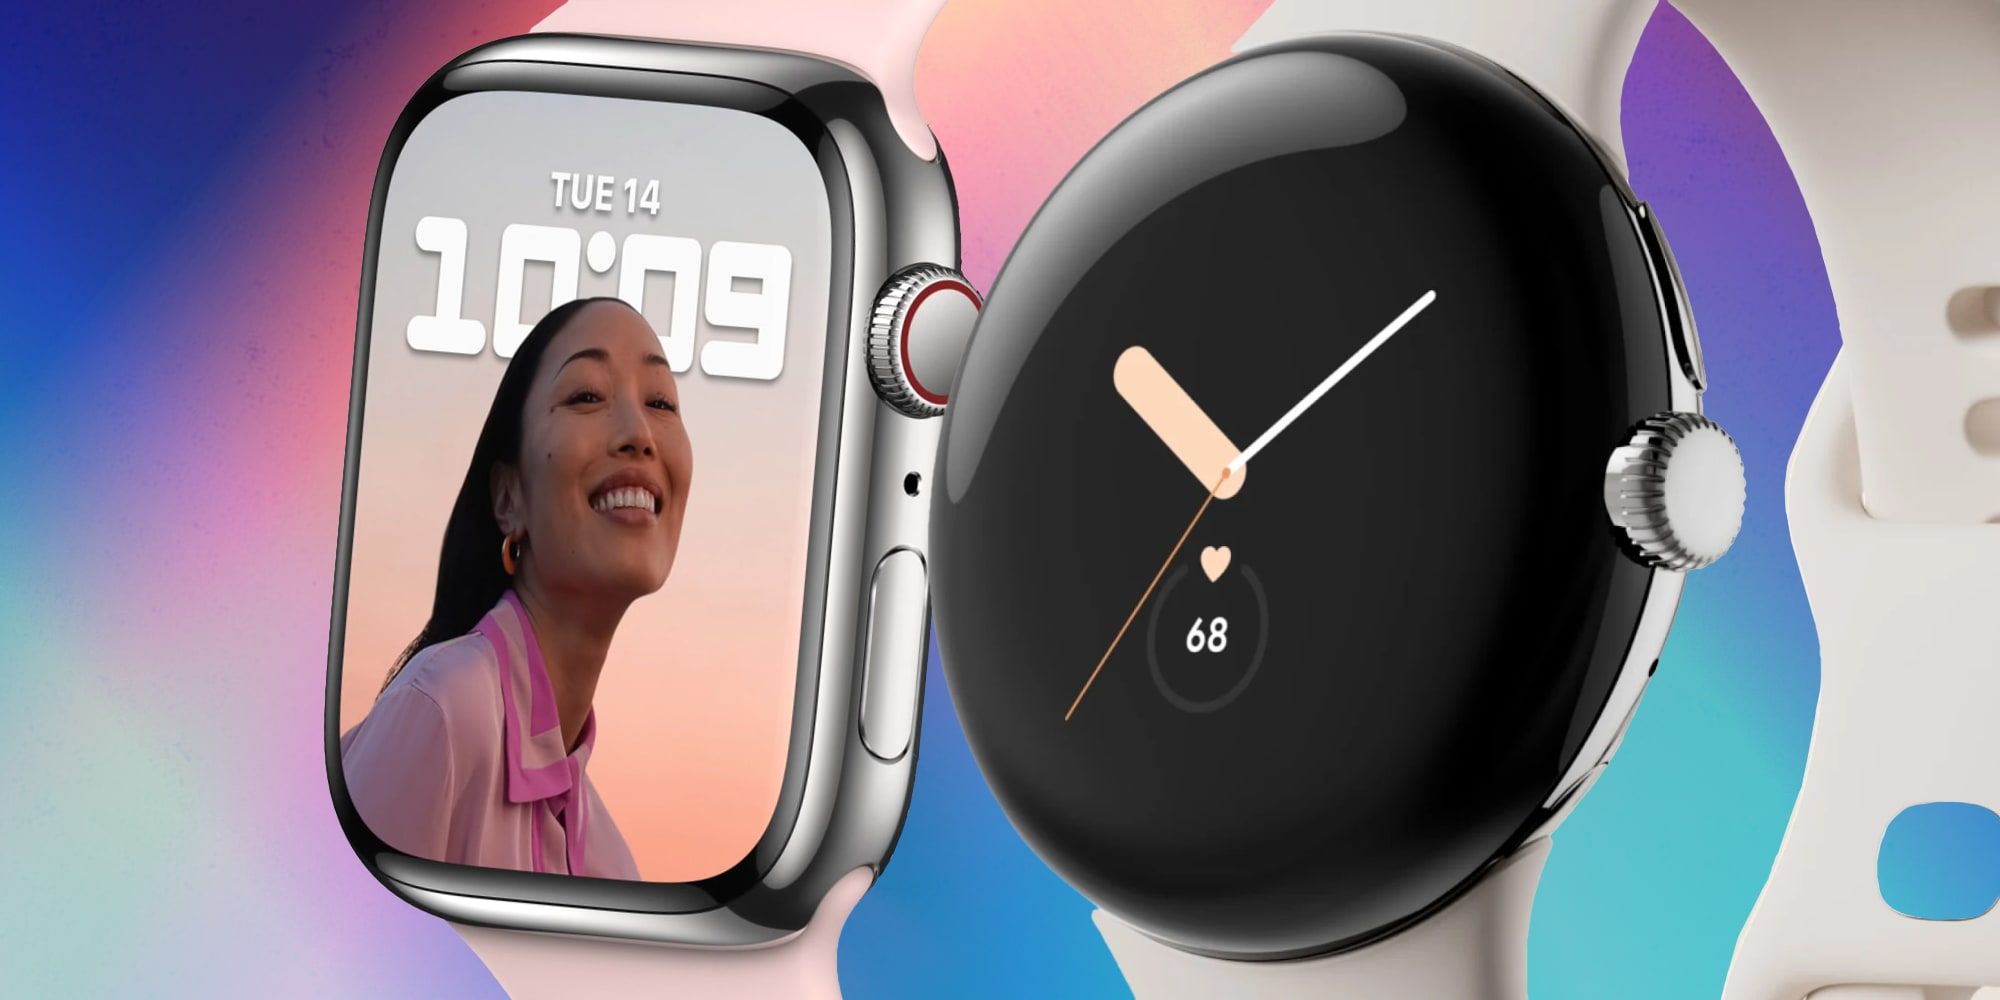 Google Is Now Ready To Take On Apple With New Pixel Watch